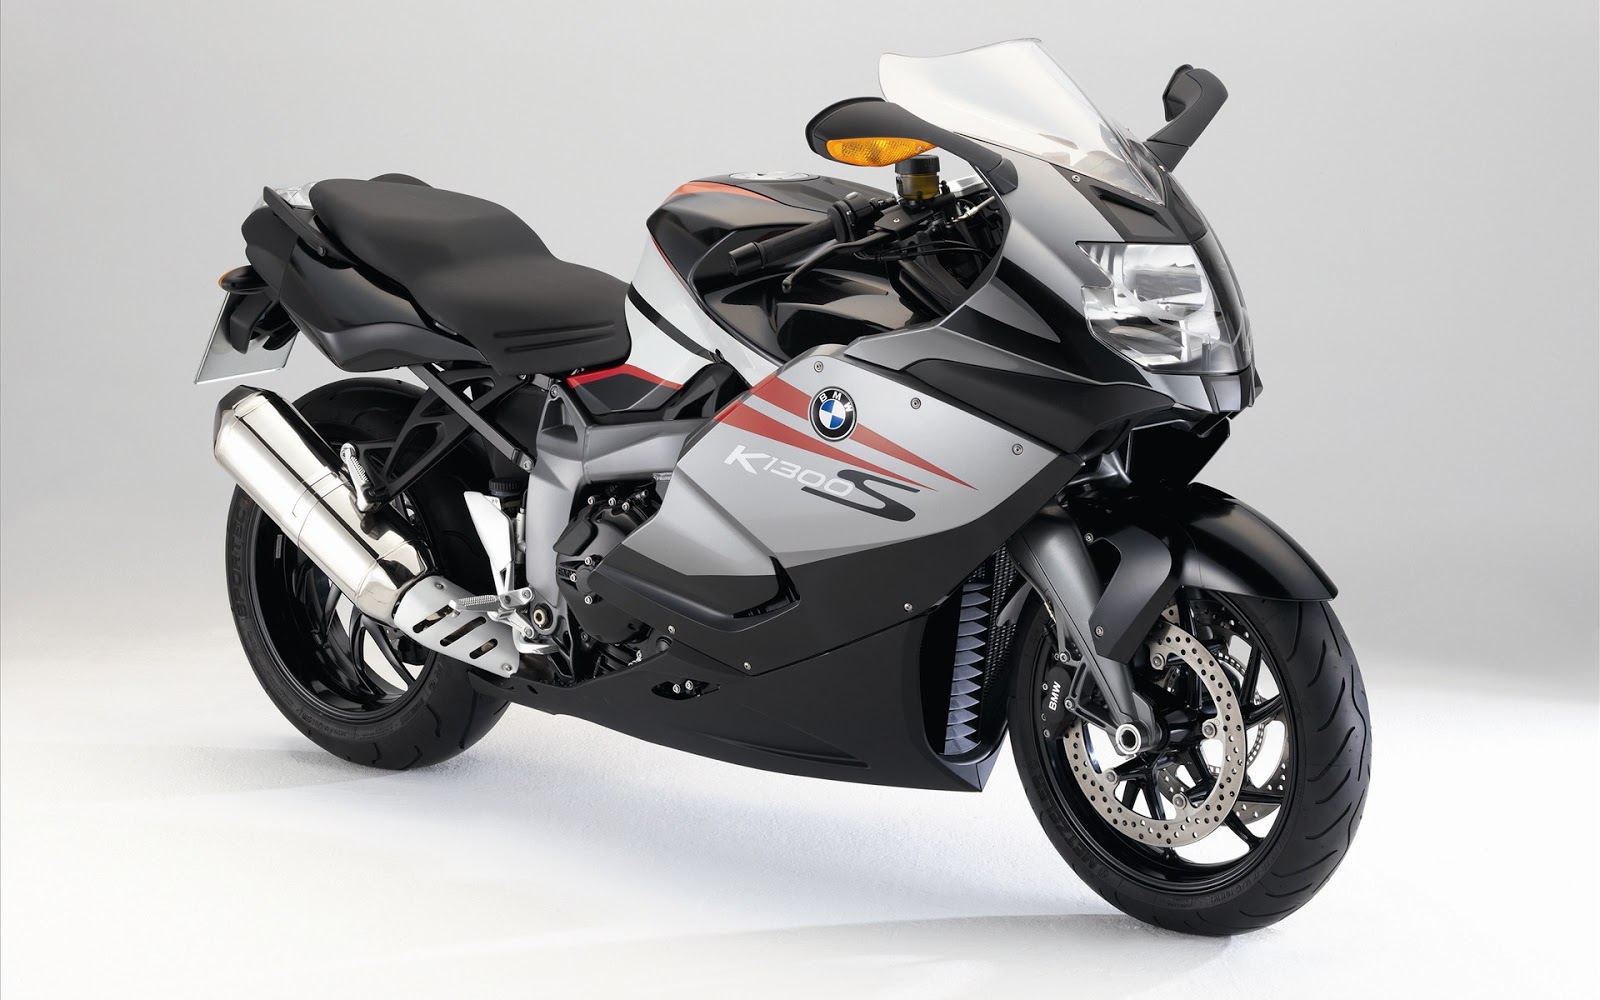 10 Fastest Production Motorcycles in the World